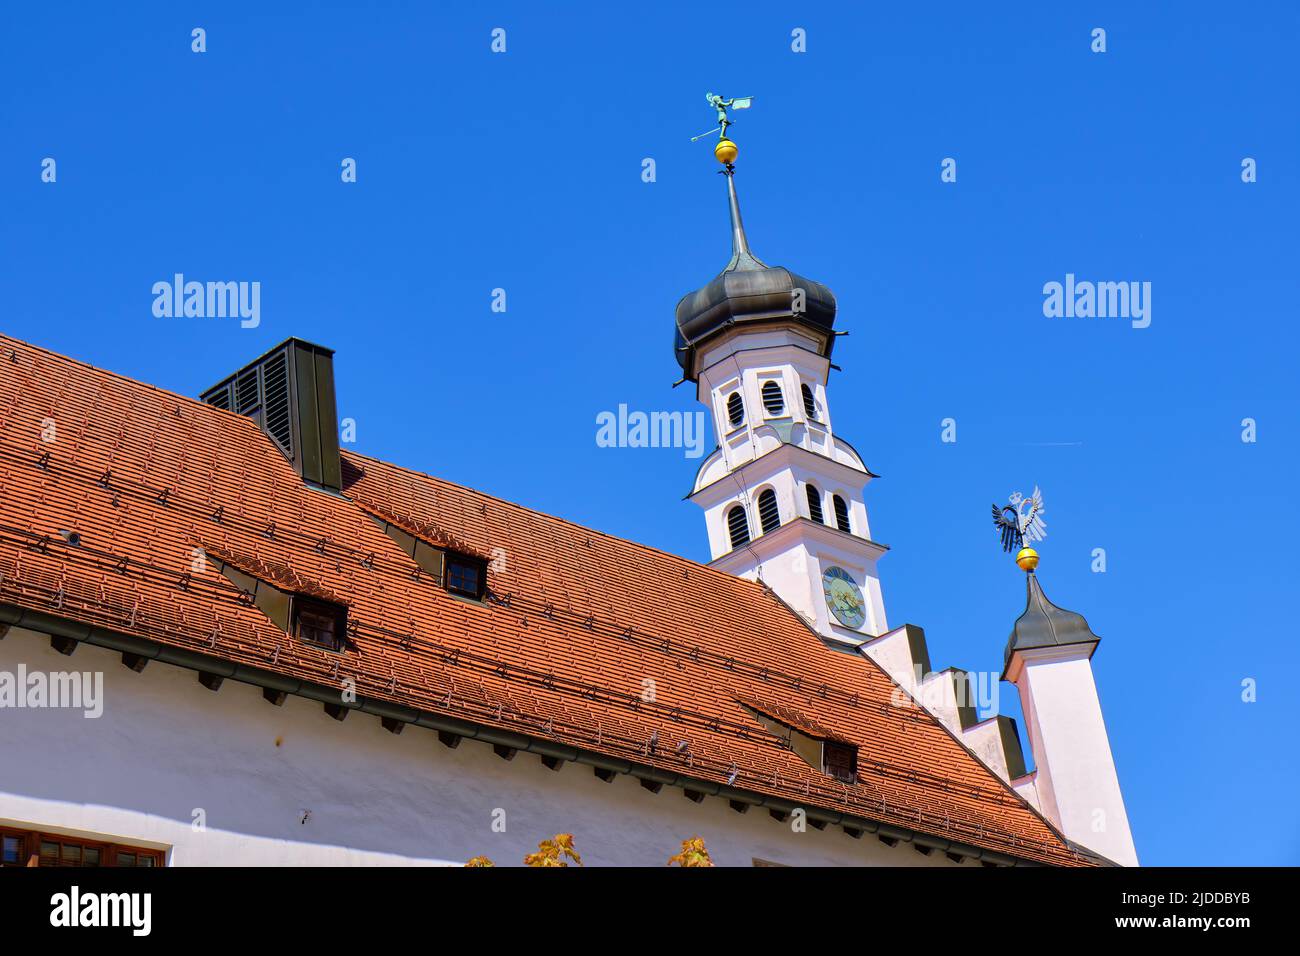 Historic Town Hall and street scene in the Old Town of Kempten in Allgaeu, Bavaria, Germany. Stock Photo